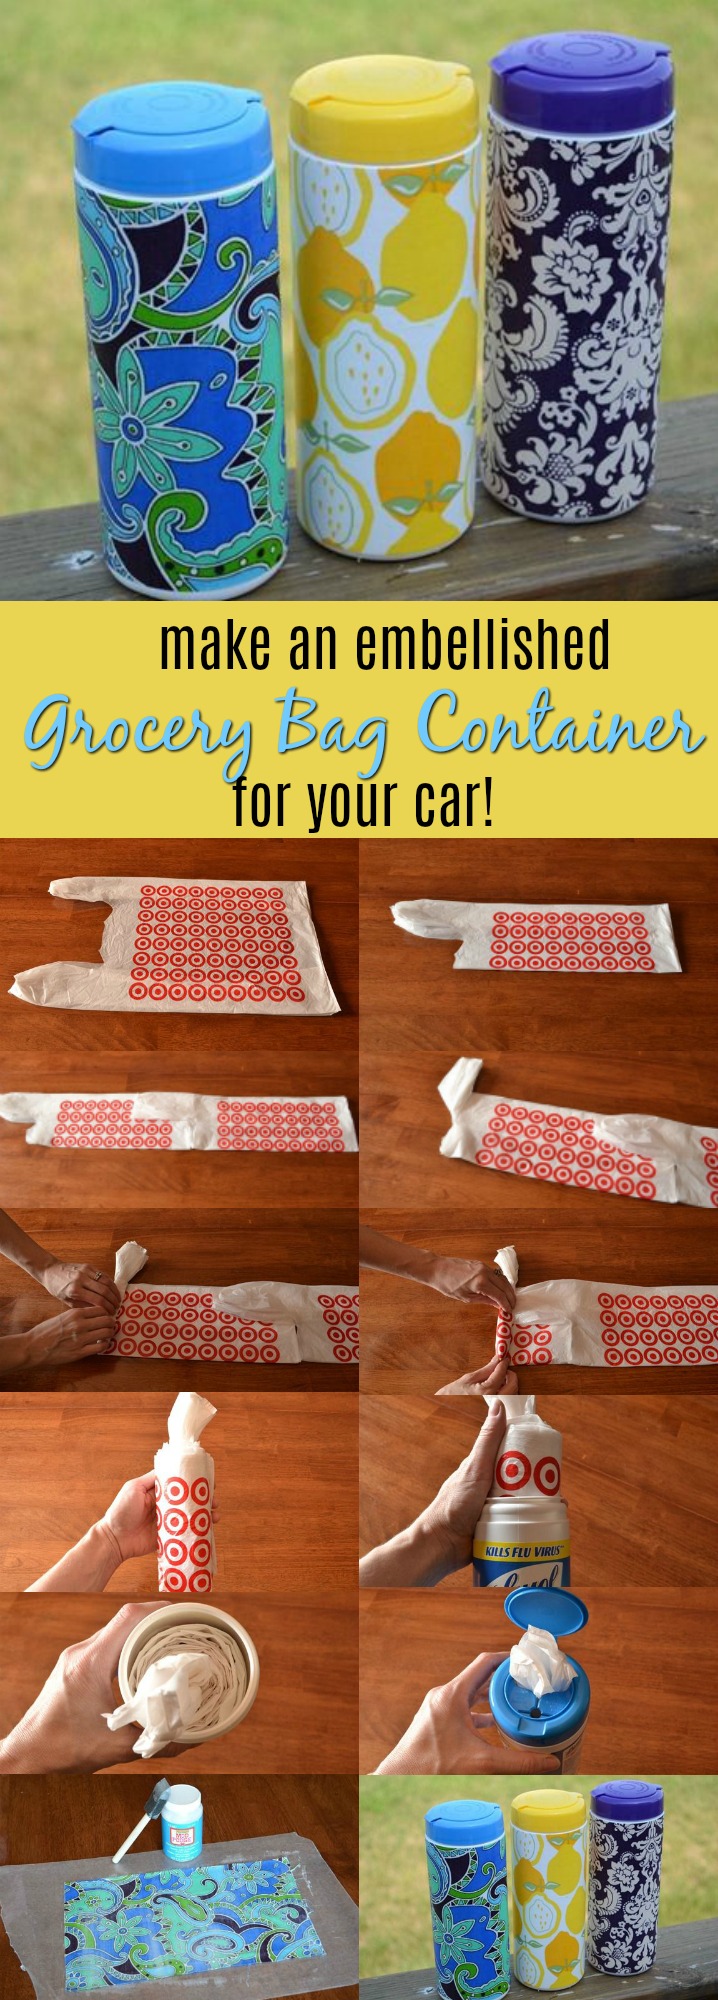 make an embellished grocery bag container for your car - very handy! 